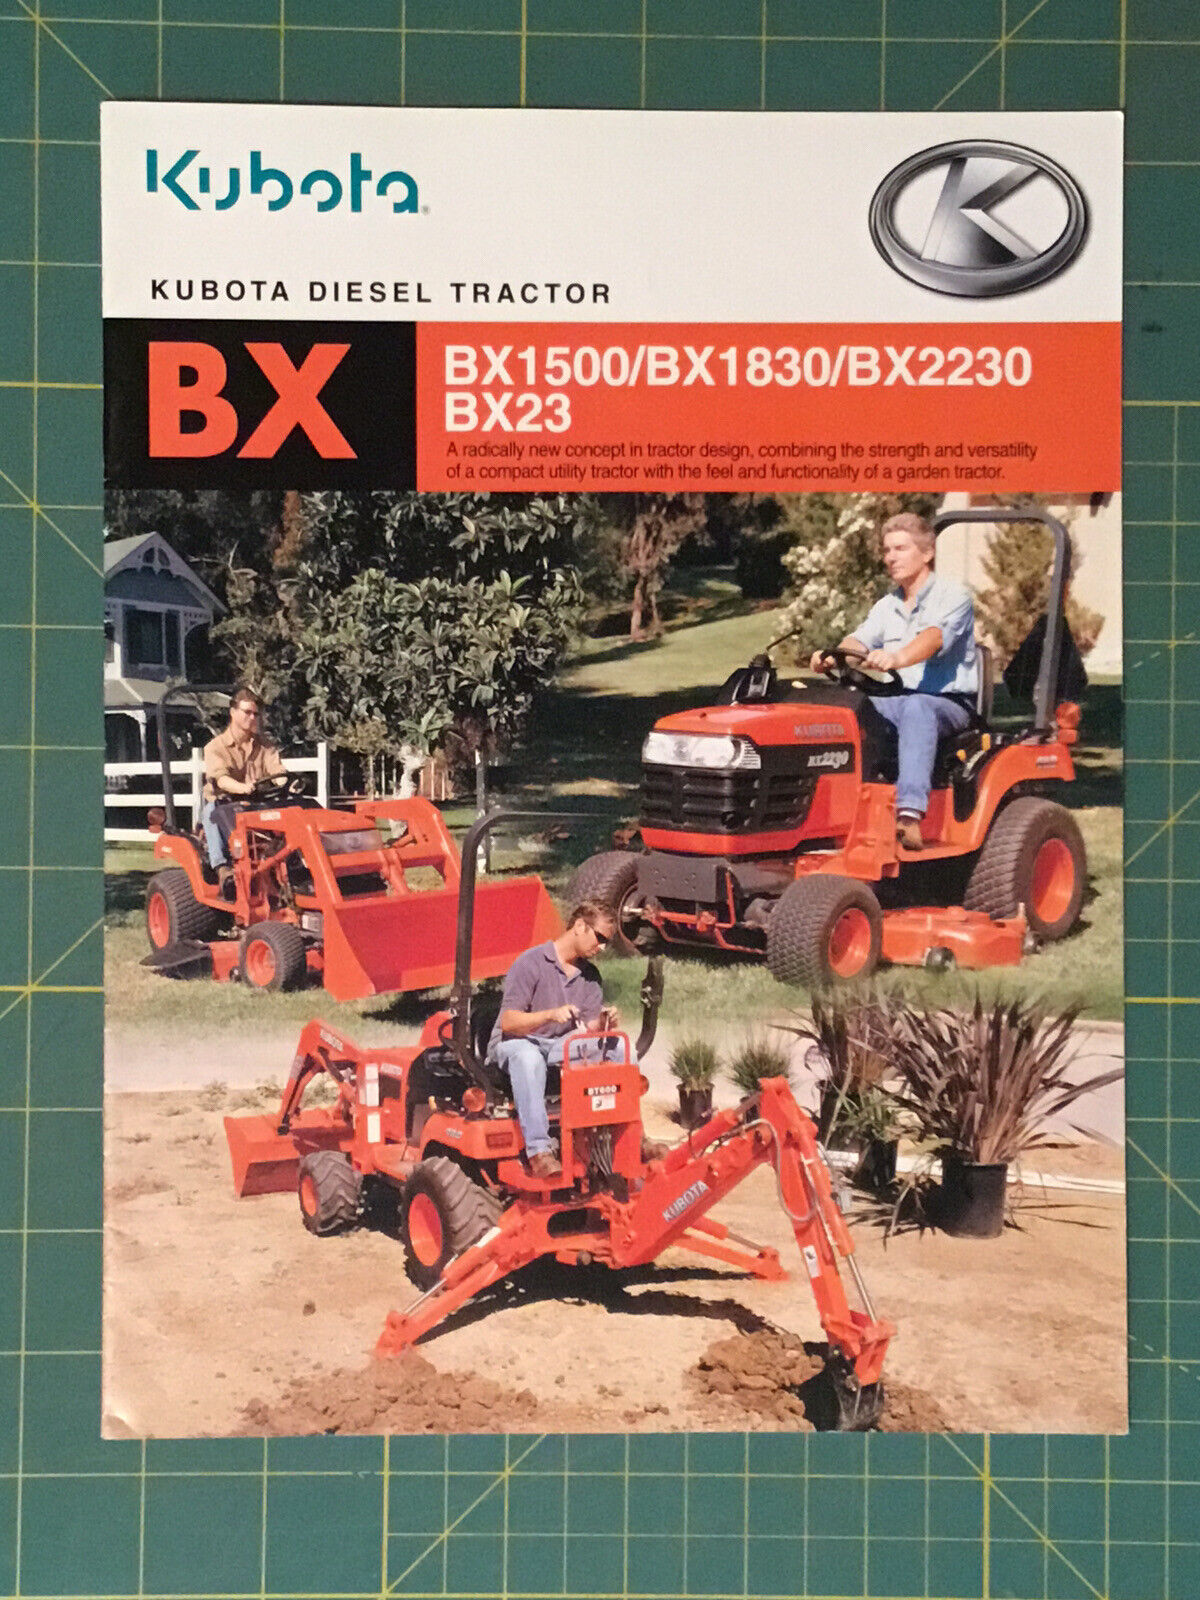 2005 KUBOTA BX1500 BX 1830 BX 2230 BX 23 TRACTOR BROCHURE, 16 Pages, NICE